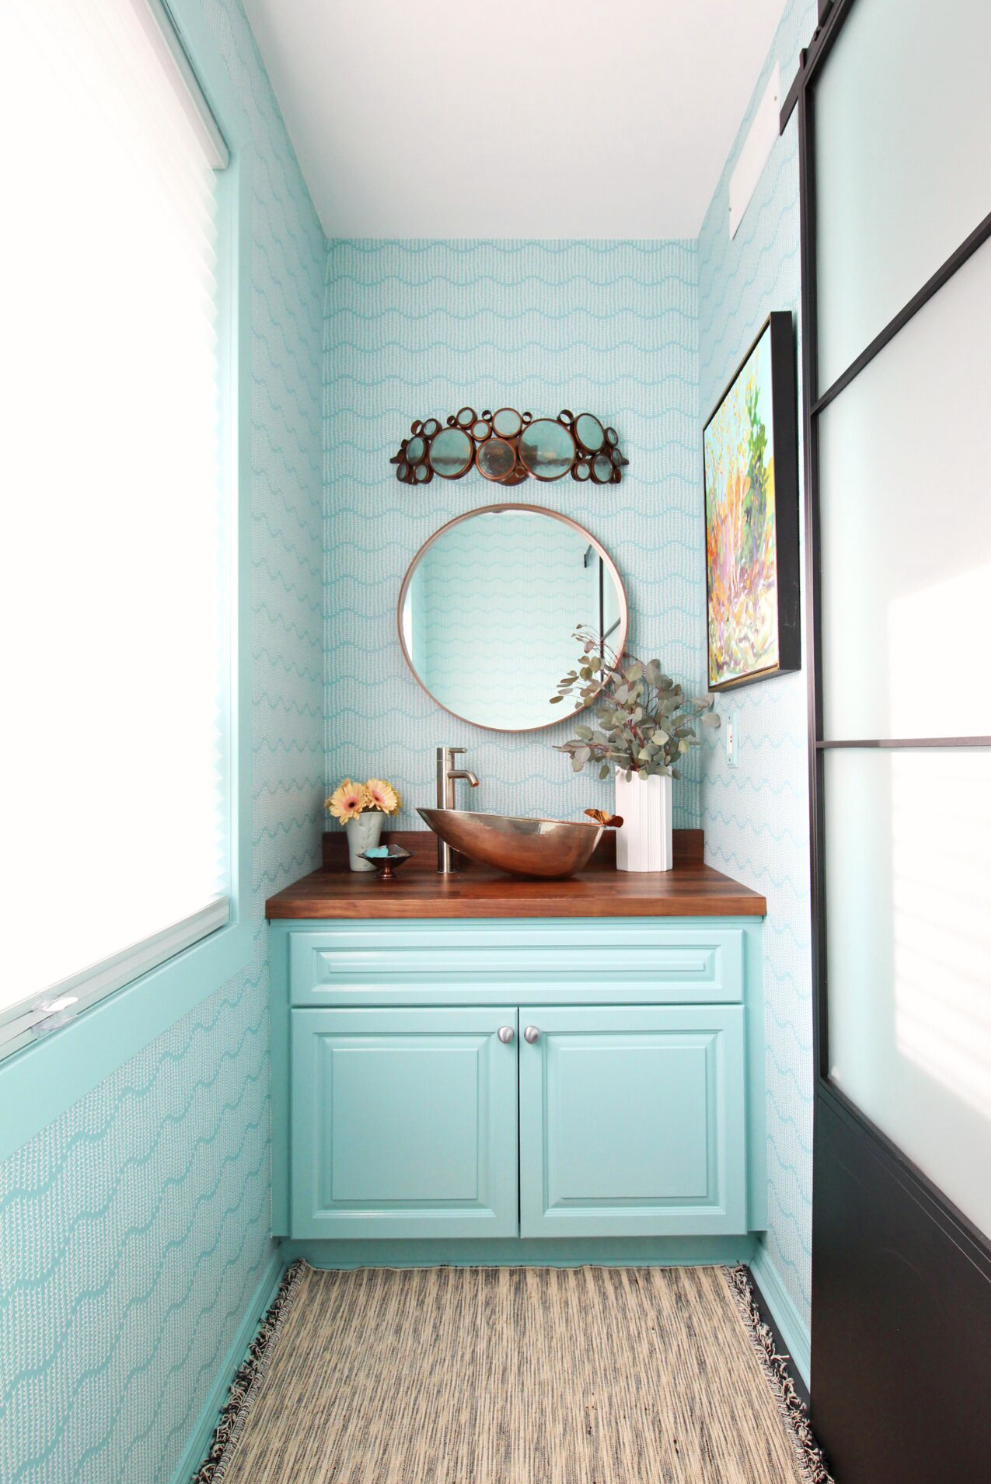 33 Bathroom Color Ideas - Best Colors to Paint a Bathroom | Apartment  Therapy